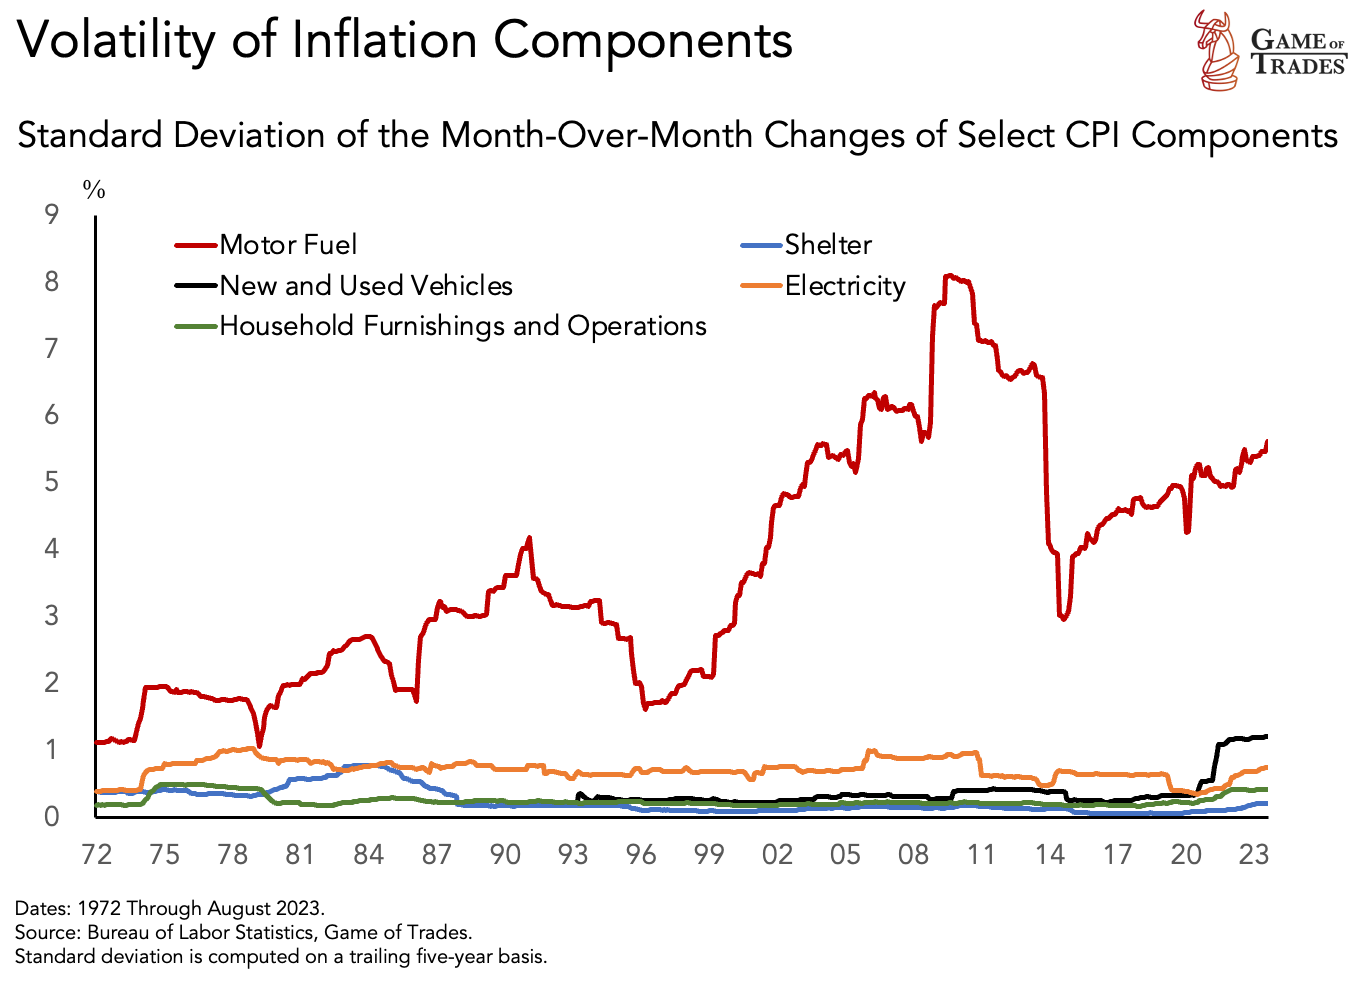 Inflation Components